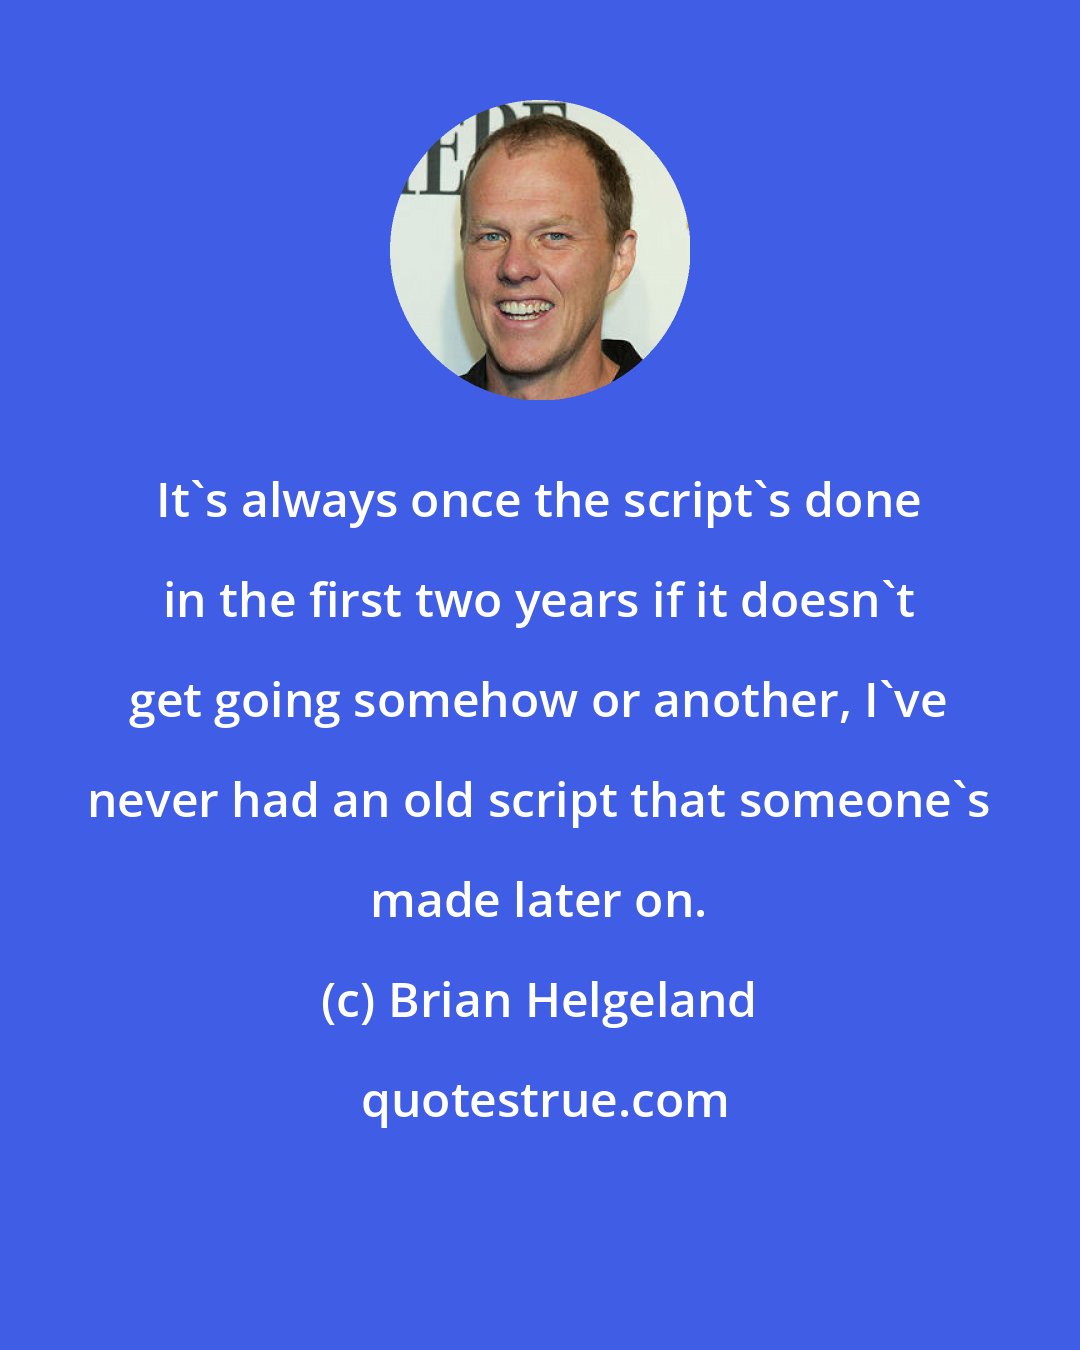 Brian Helgeland: It's always once the script's done in the first two years if it doesn't get going somehow or another, I've never had an old script that someone's made later on.